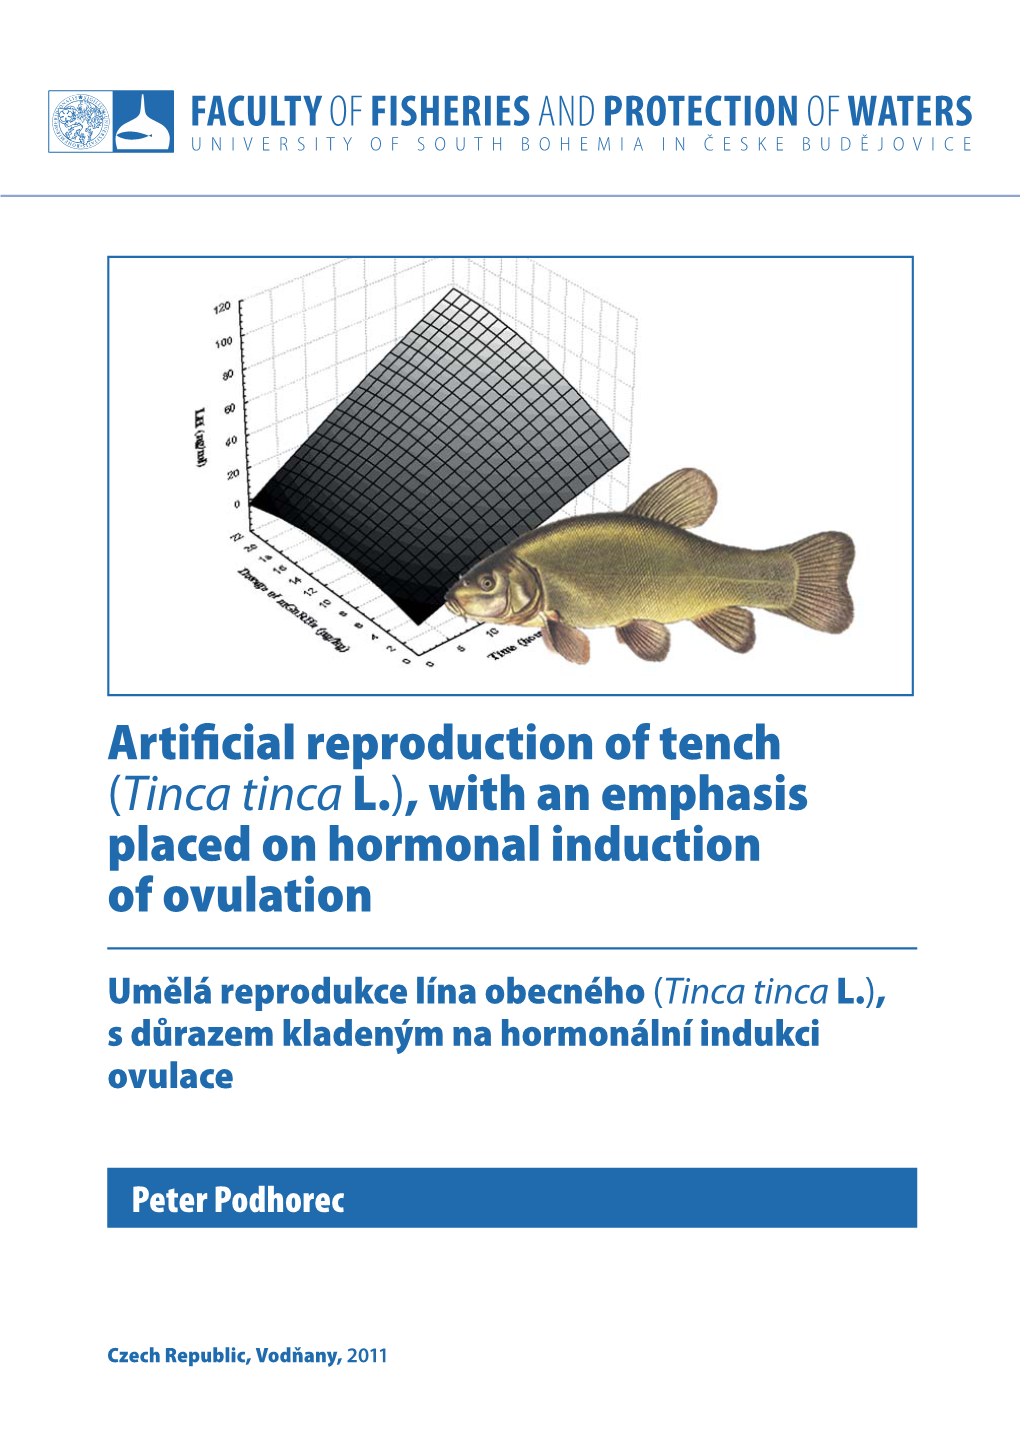 Artificial Reproduction of Tench (Tinca Tincal.), with an Emphasis Placed on Hormonal Induction of Ovulation